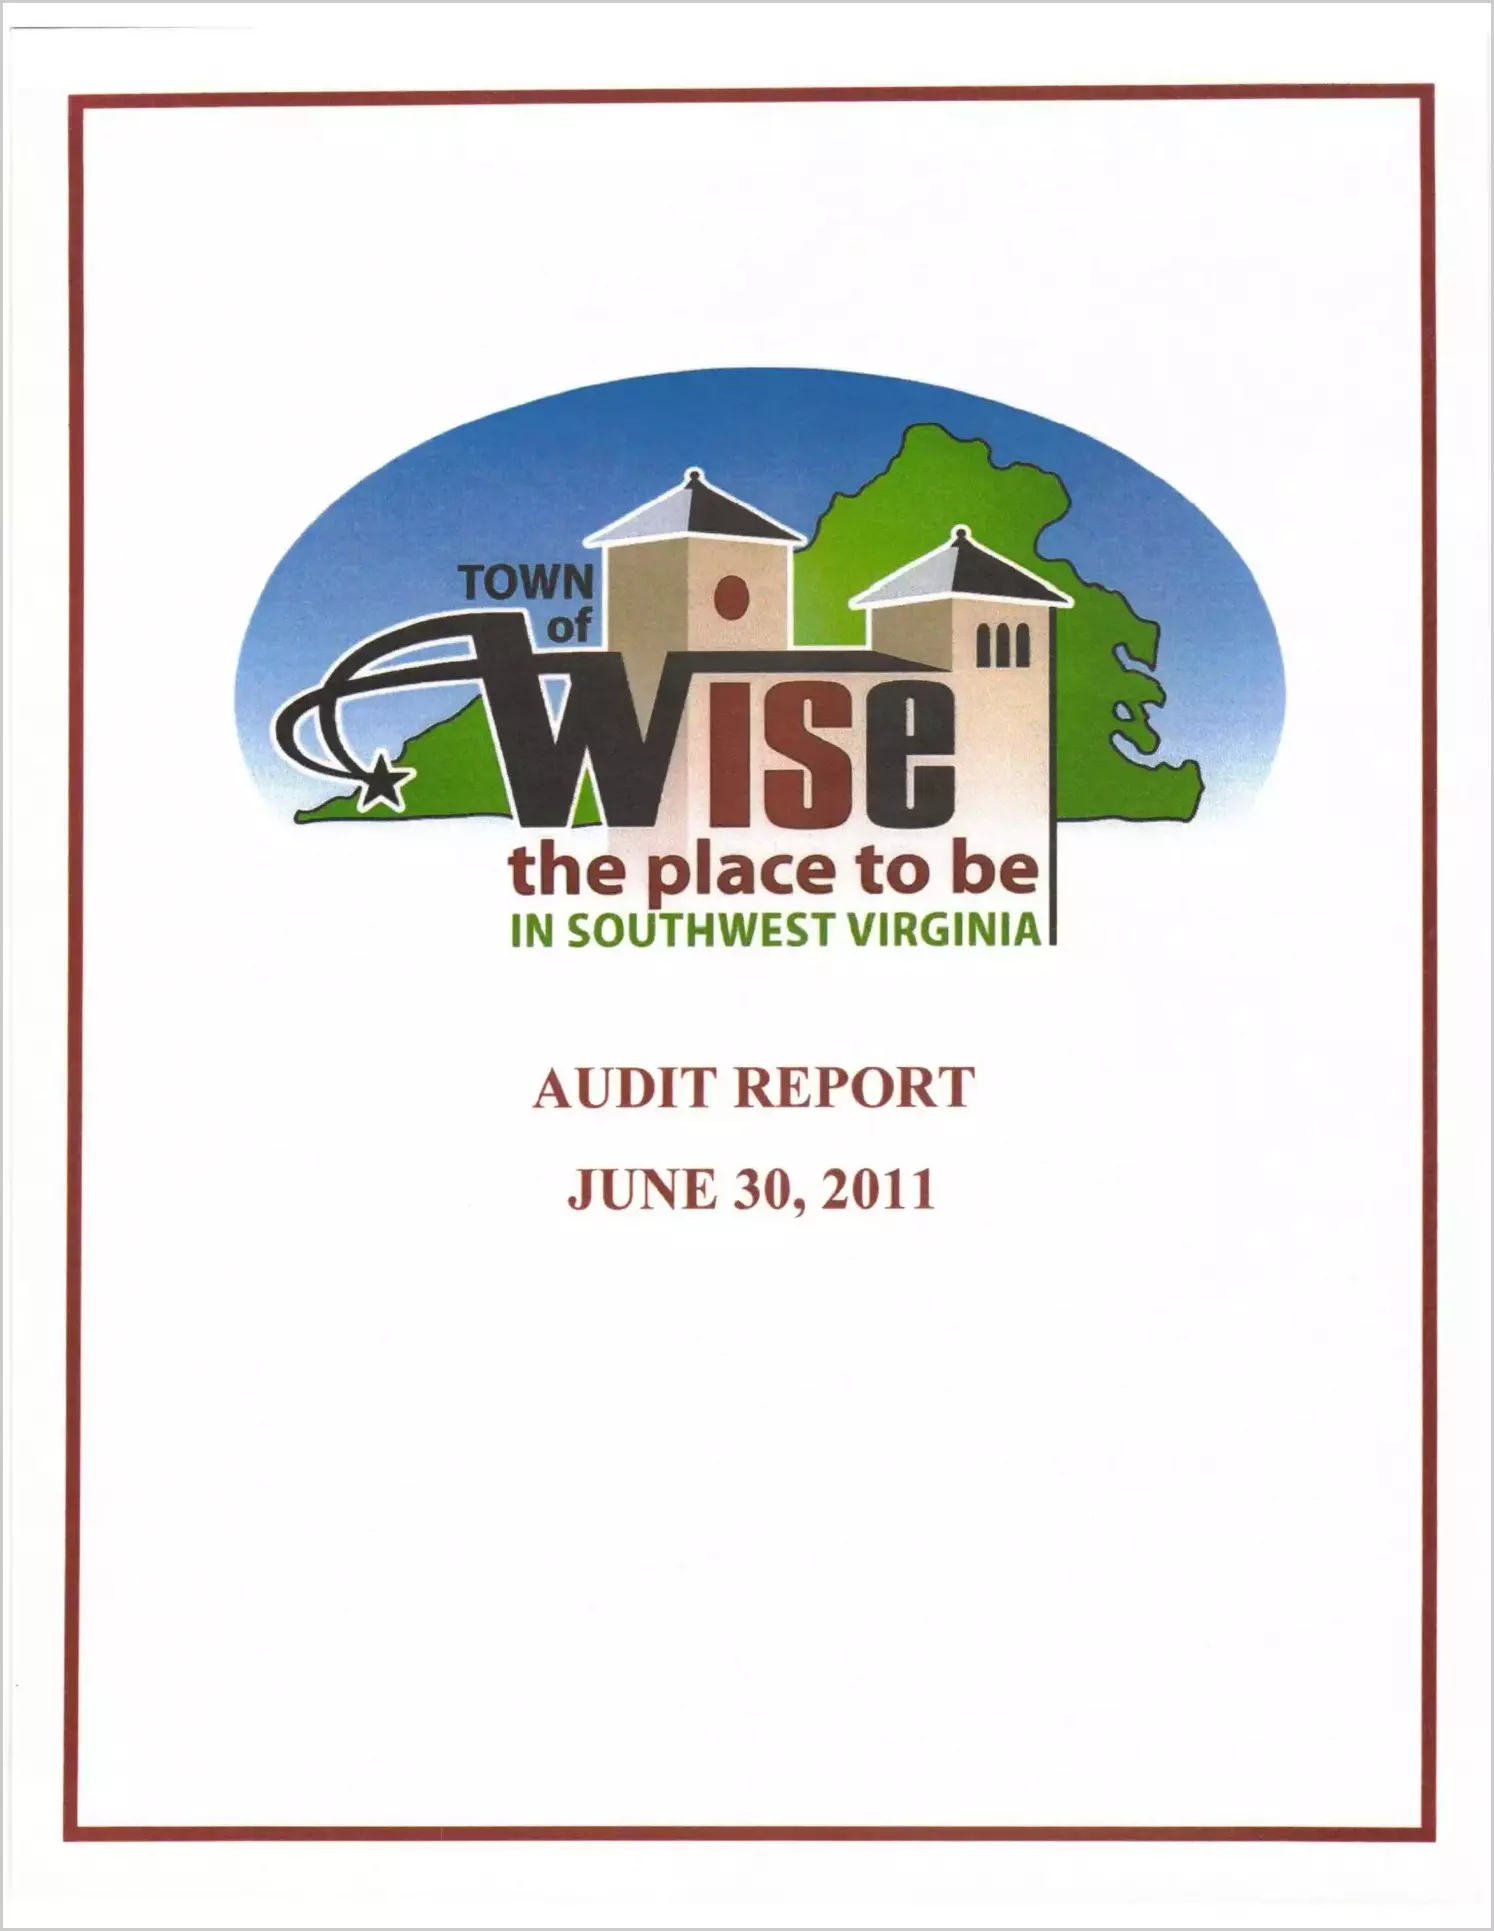 2011 Annual Financial Report for Town of Wise